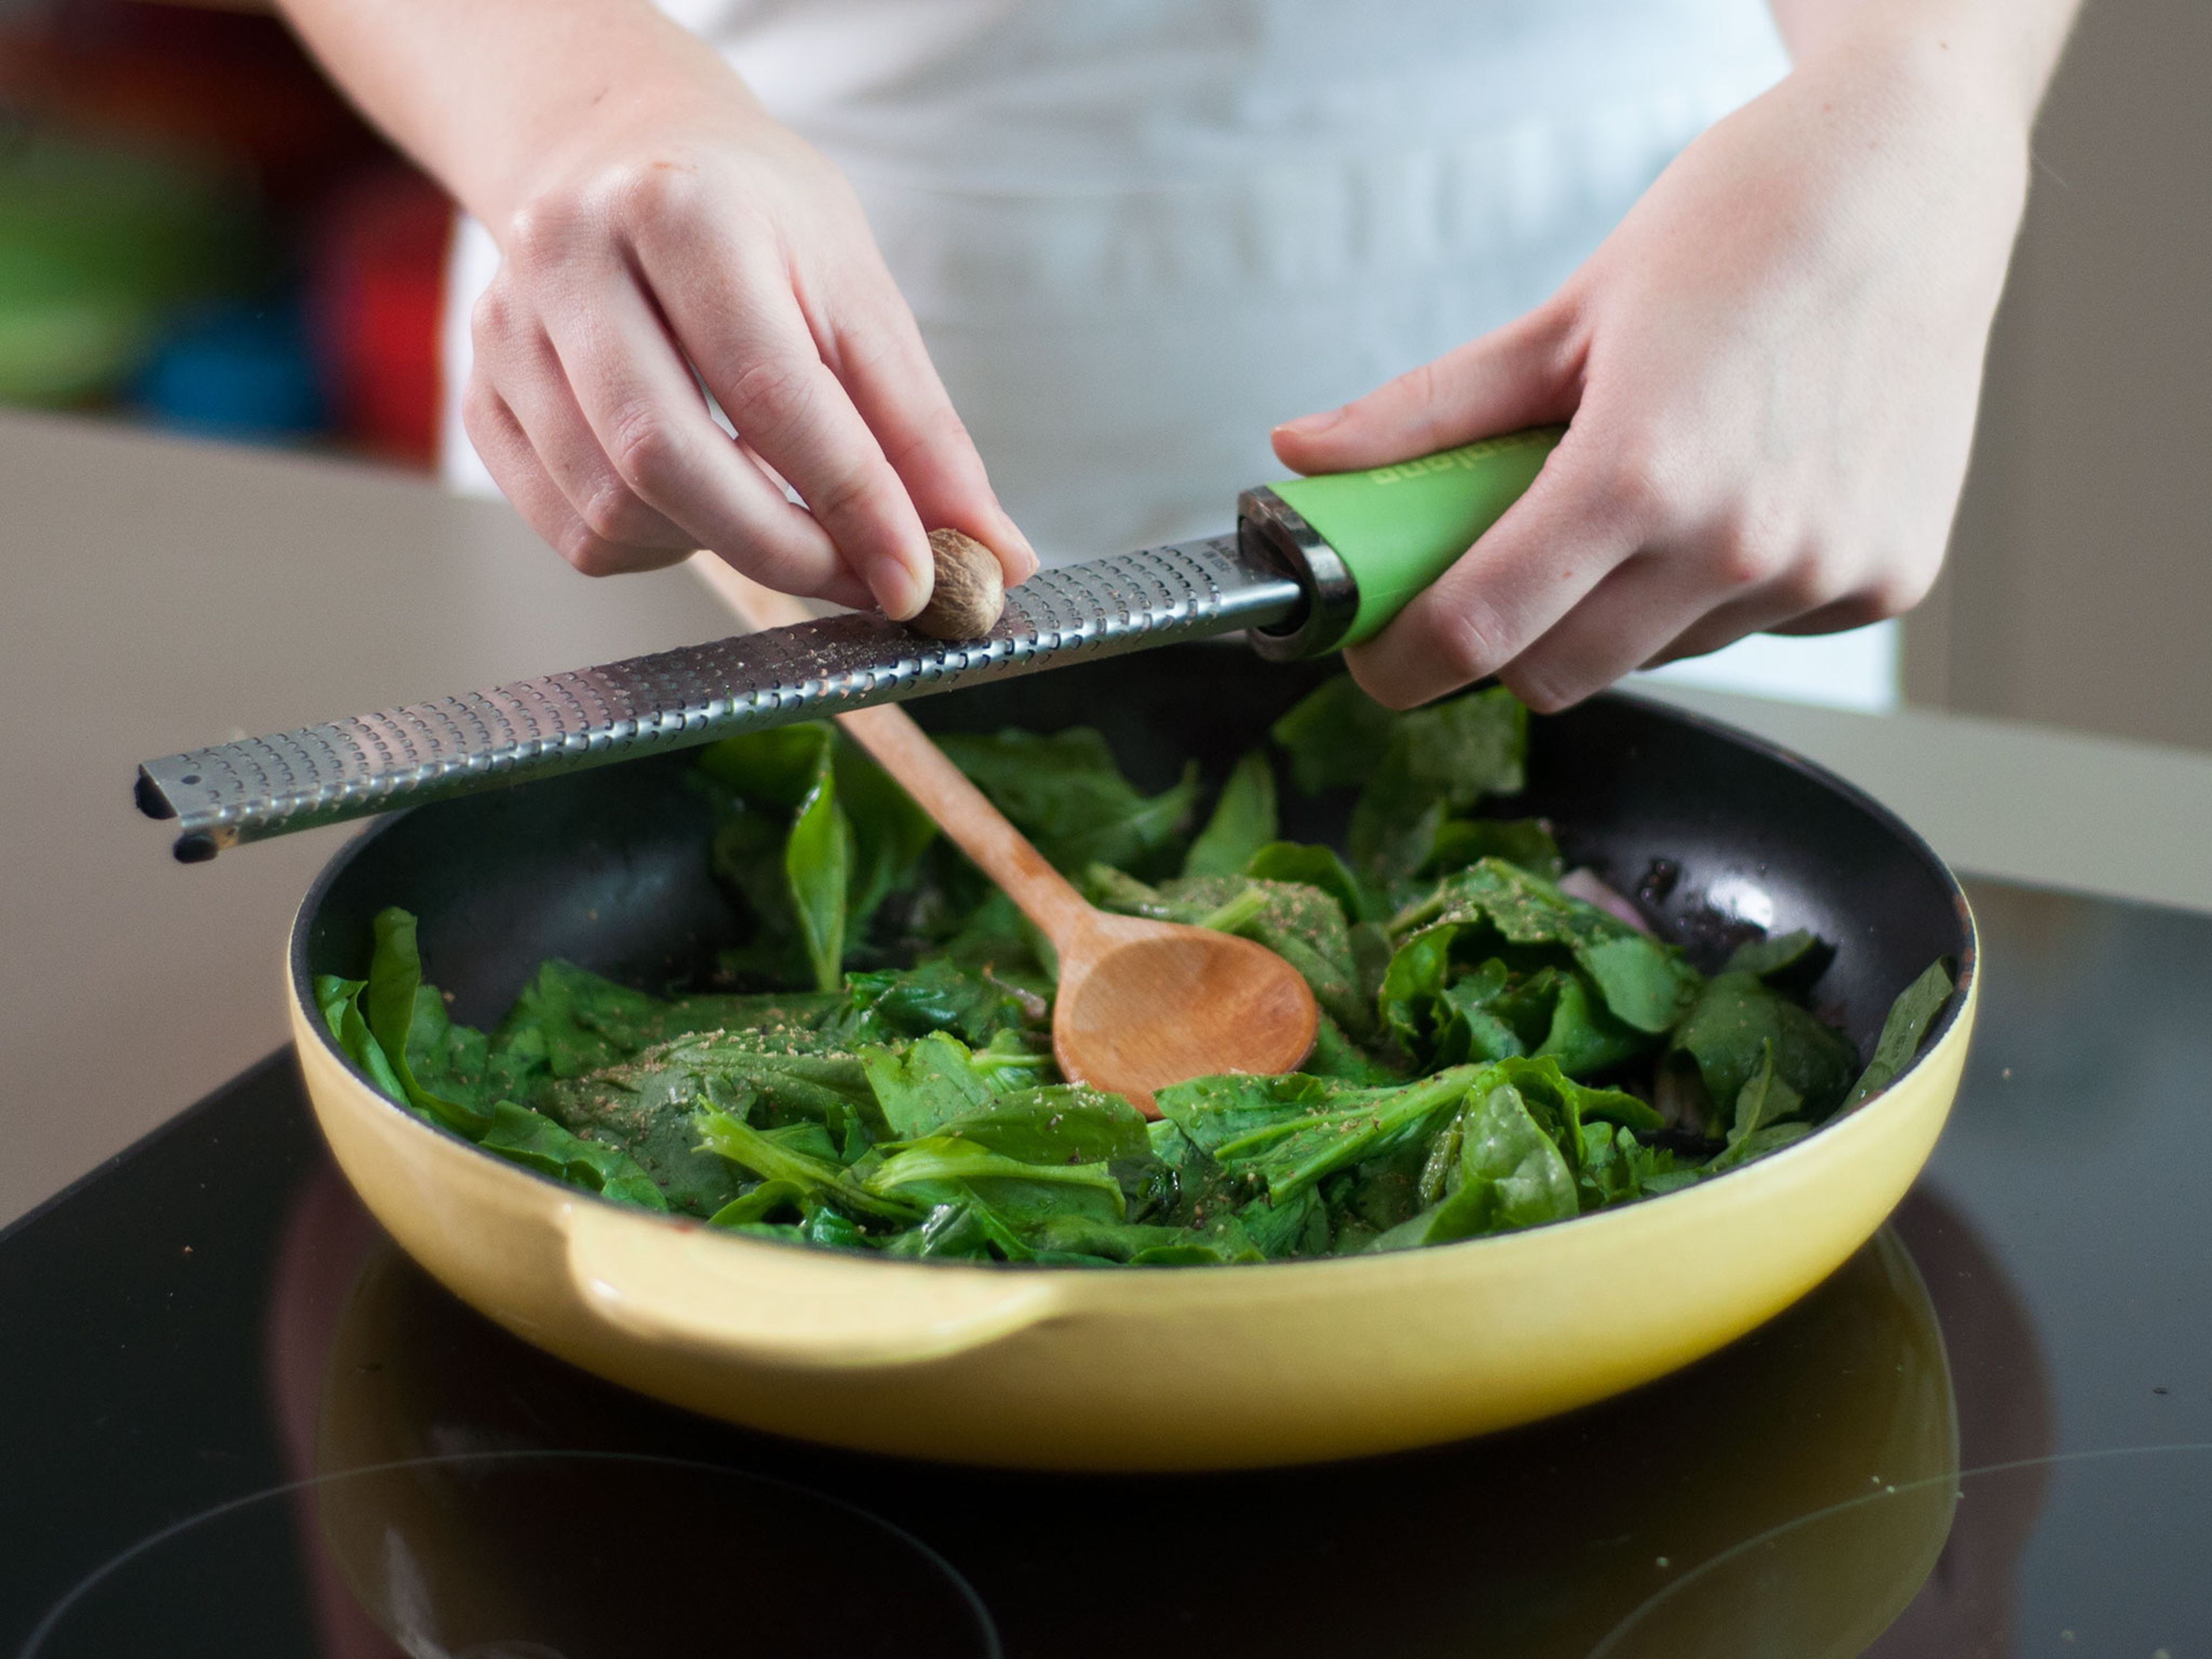 In a large frying pan, heat up some vegetable oil over medium heat and sauté shallot for approx. 1 – 2 min. Then, add spinach and continue to cook for approx. 1 – 2 min. until wilted. Grate nutmeg into pan and stir thoroughly. Remove from heat.